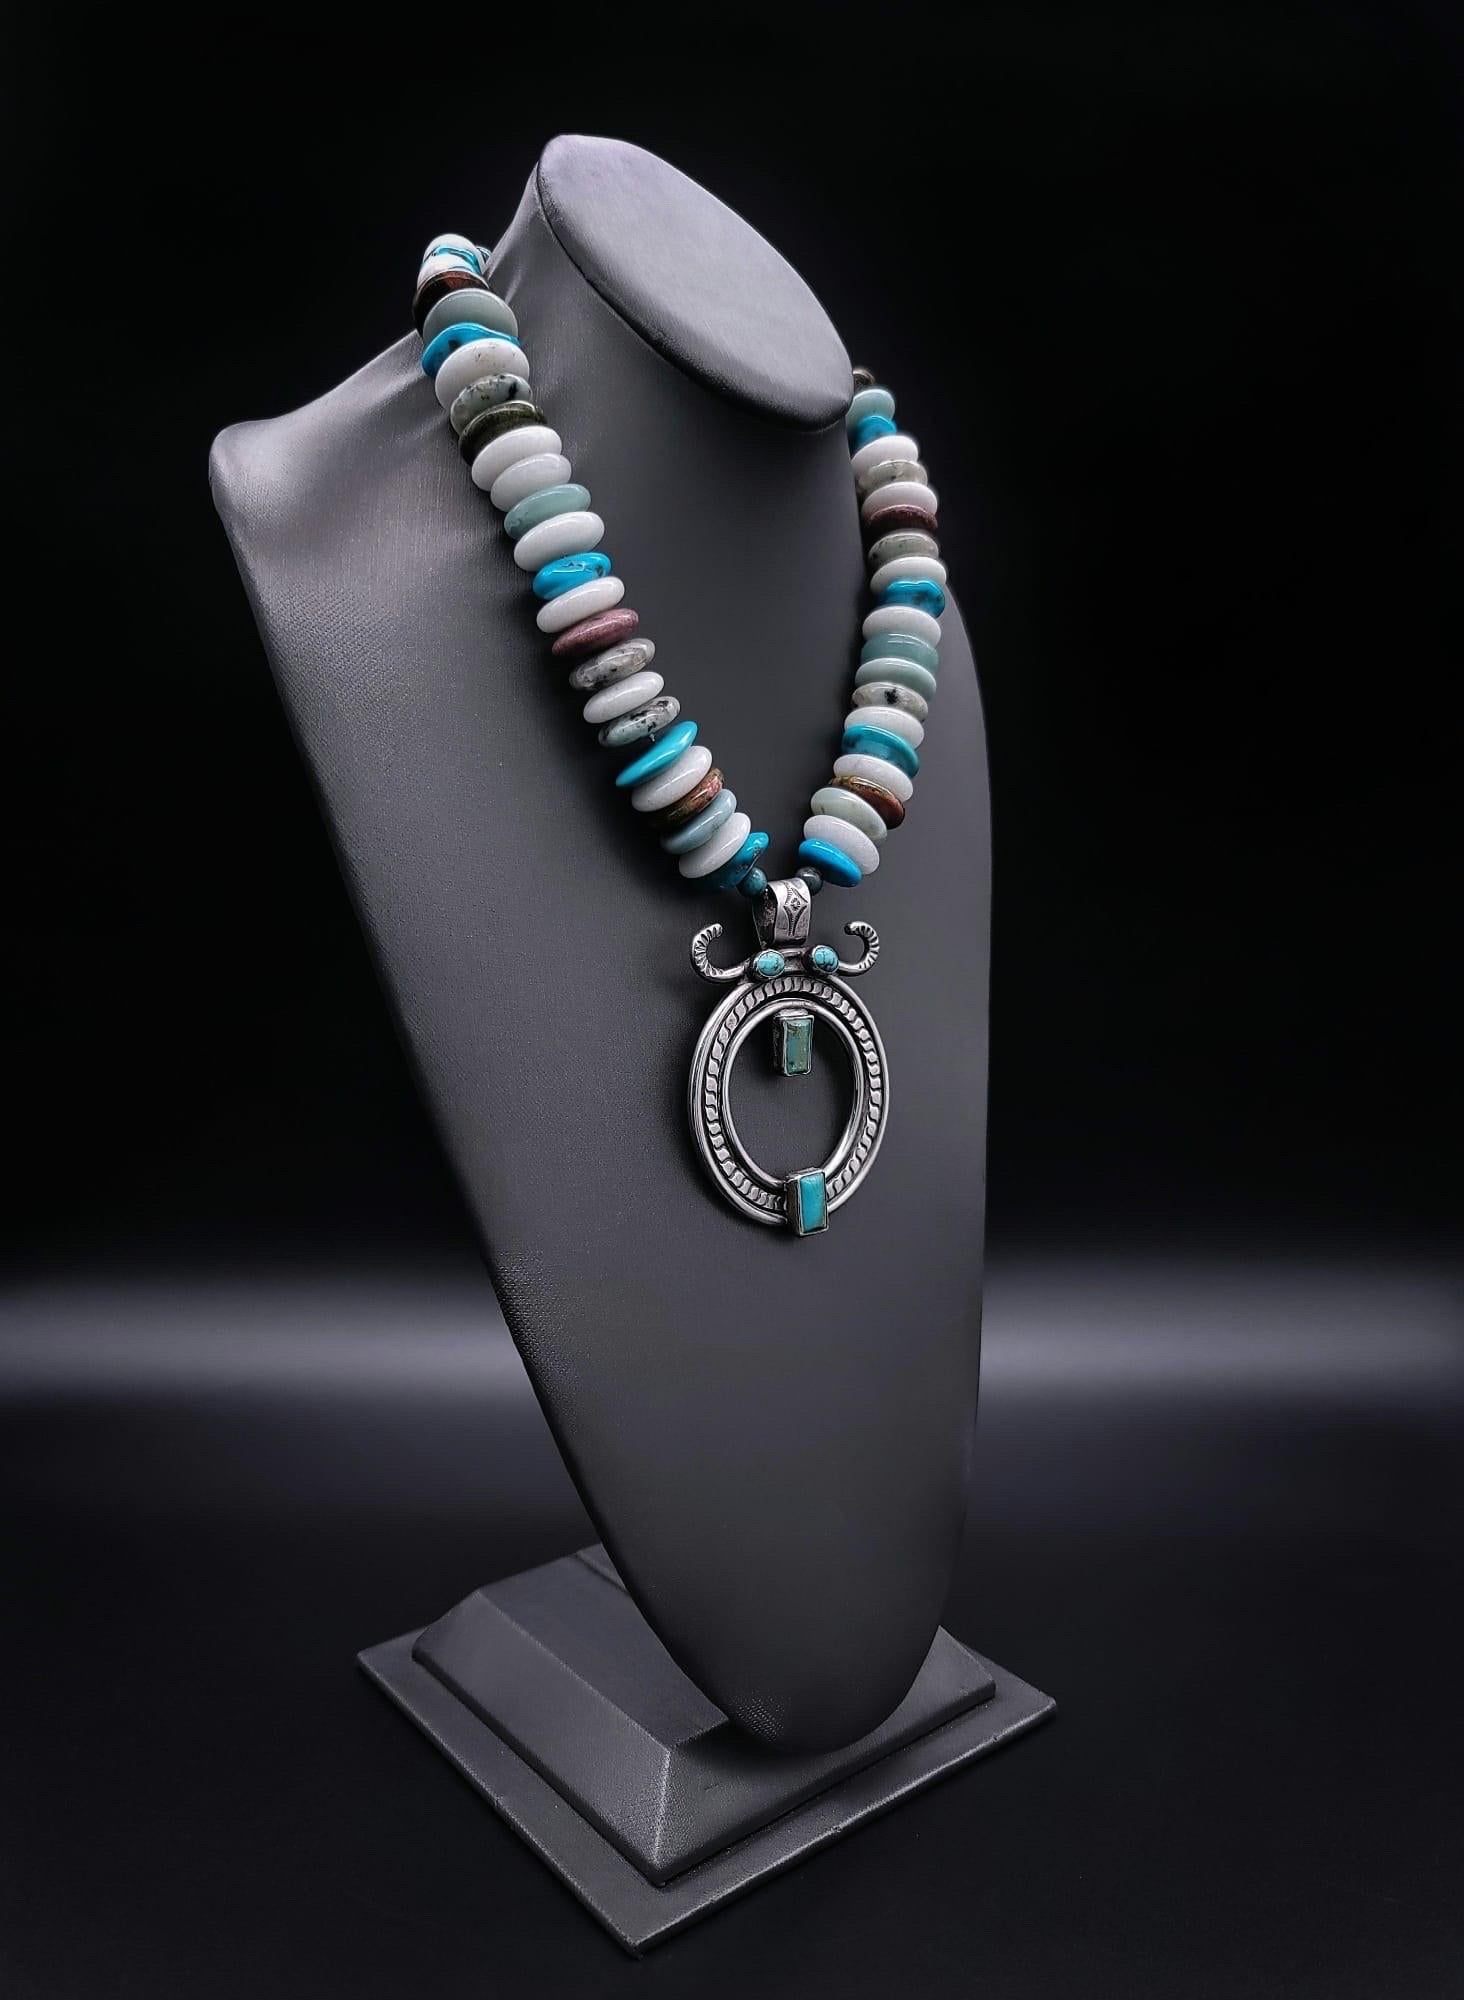 One-of-a-Kind

Indulge in the rich cultural heritage and timeless beauty of Native American craftsmanship with this vintage solid Sterling Silver pendant, adorned with striking turquoise accents. Suspended from a harmonious strand of center-drilled